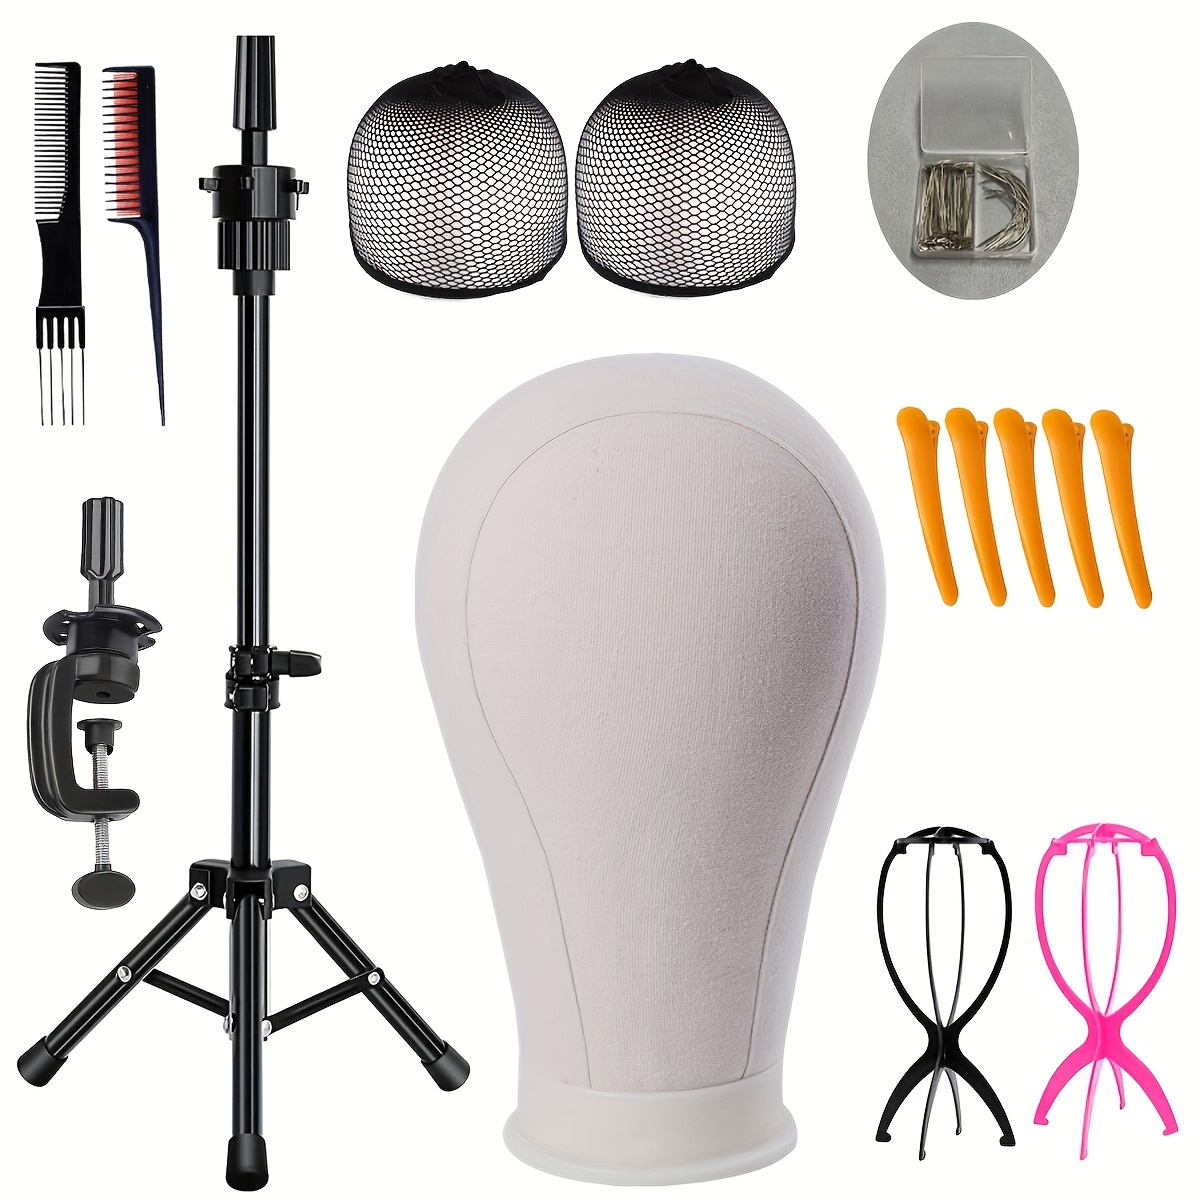 Adjustable Wig Stands For Wigs Wig Stand For Head For Styling Wigs